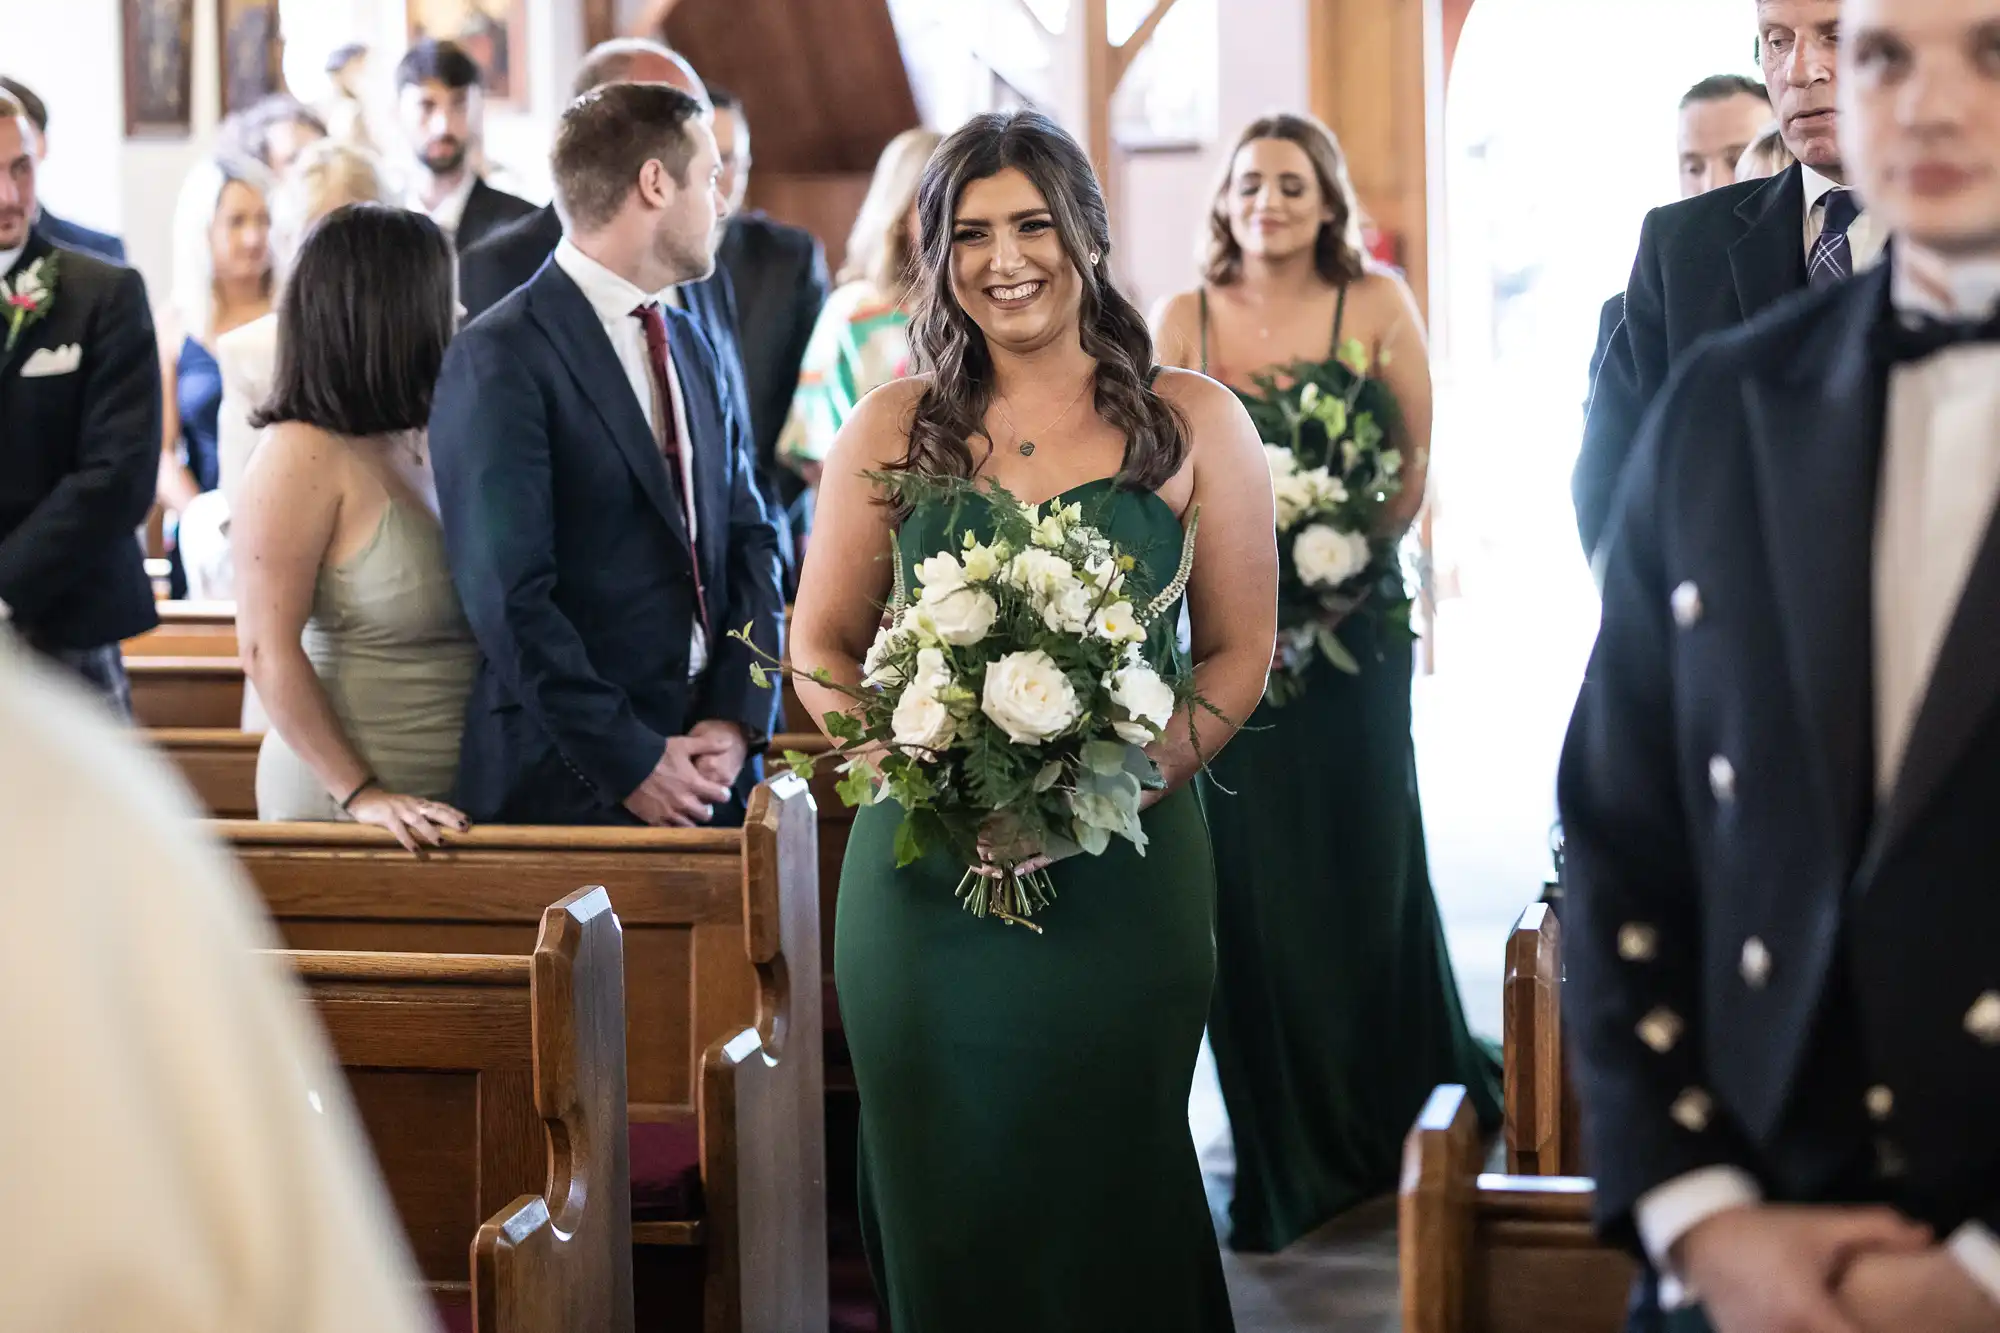 A bridesmaid in a green dress smiling as she walks down the aisle in a church, holding a bouquet, with guests looking on.